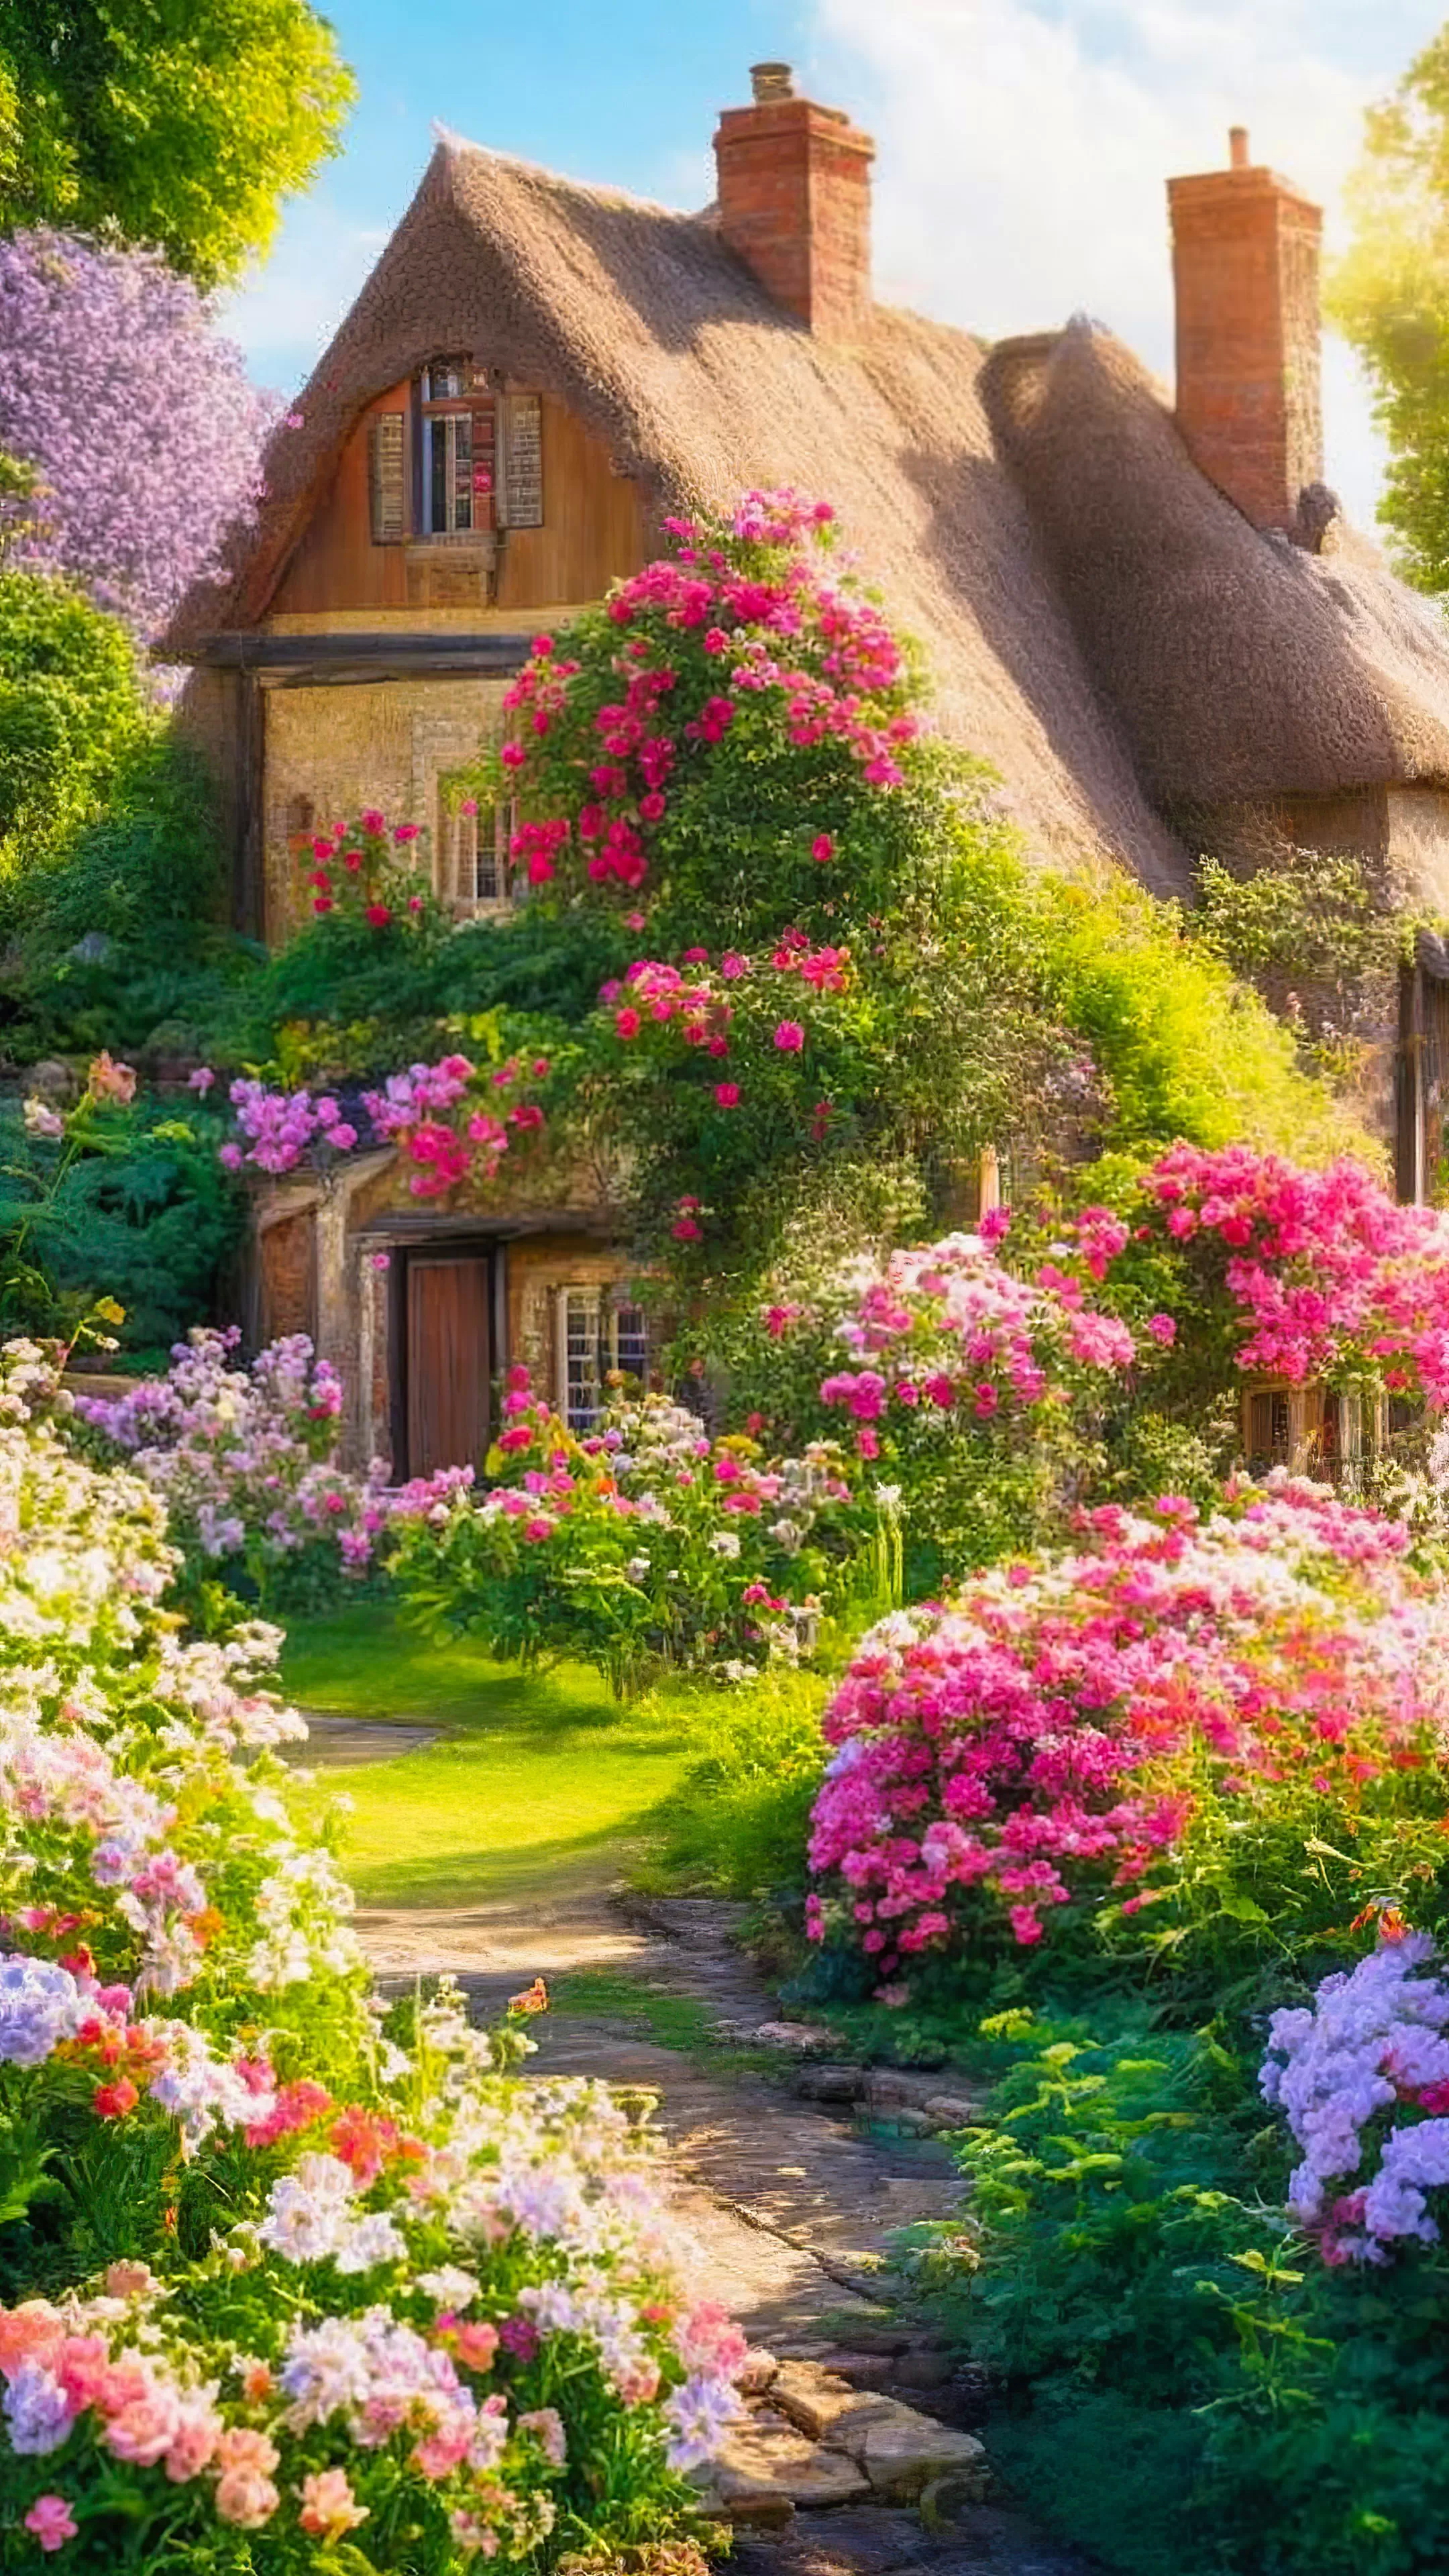 Experience the charm of our nature HD wallpaper for your phone, featuring a charming cottage with a vibrant flower garden on a sunny day, and let your device radiate with the warmth of a summer’s day.